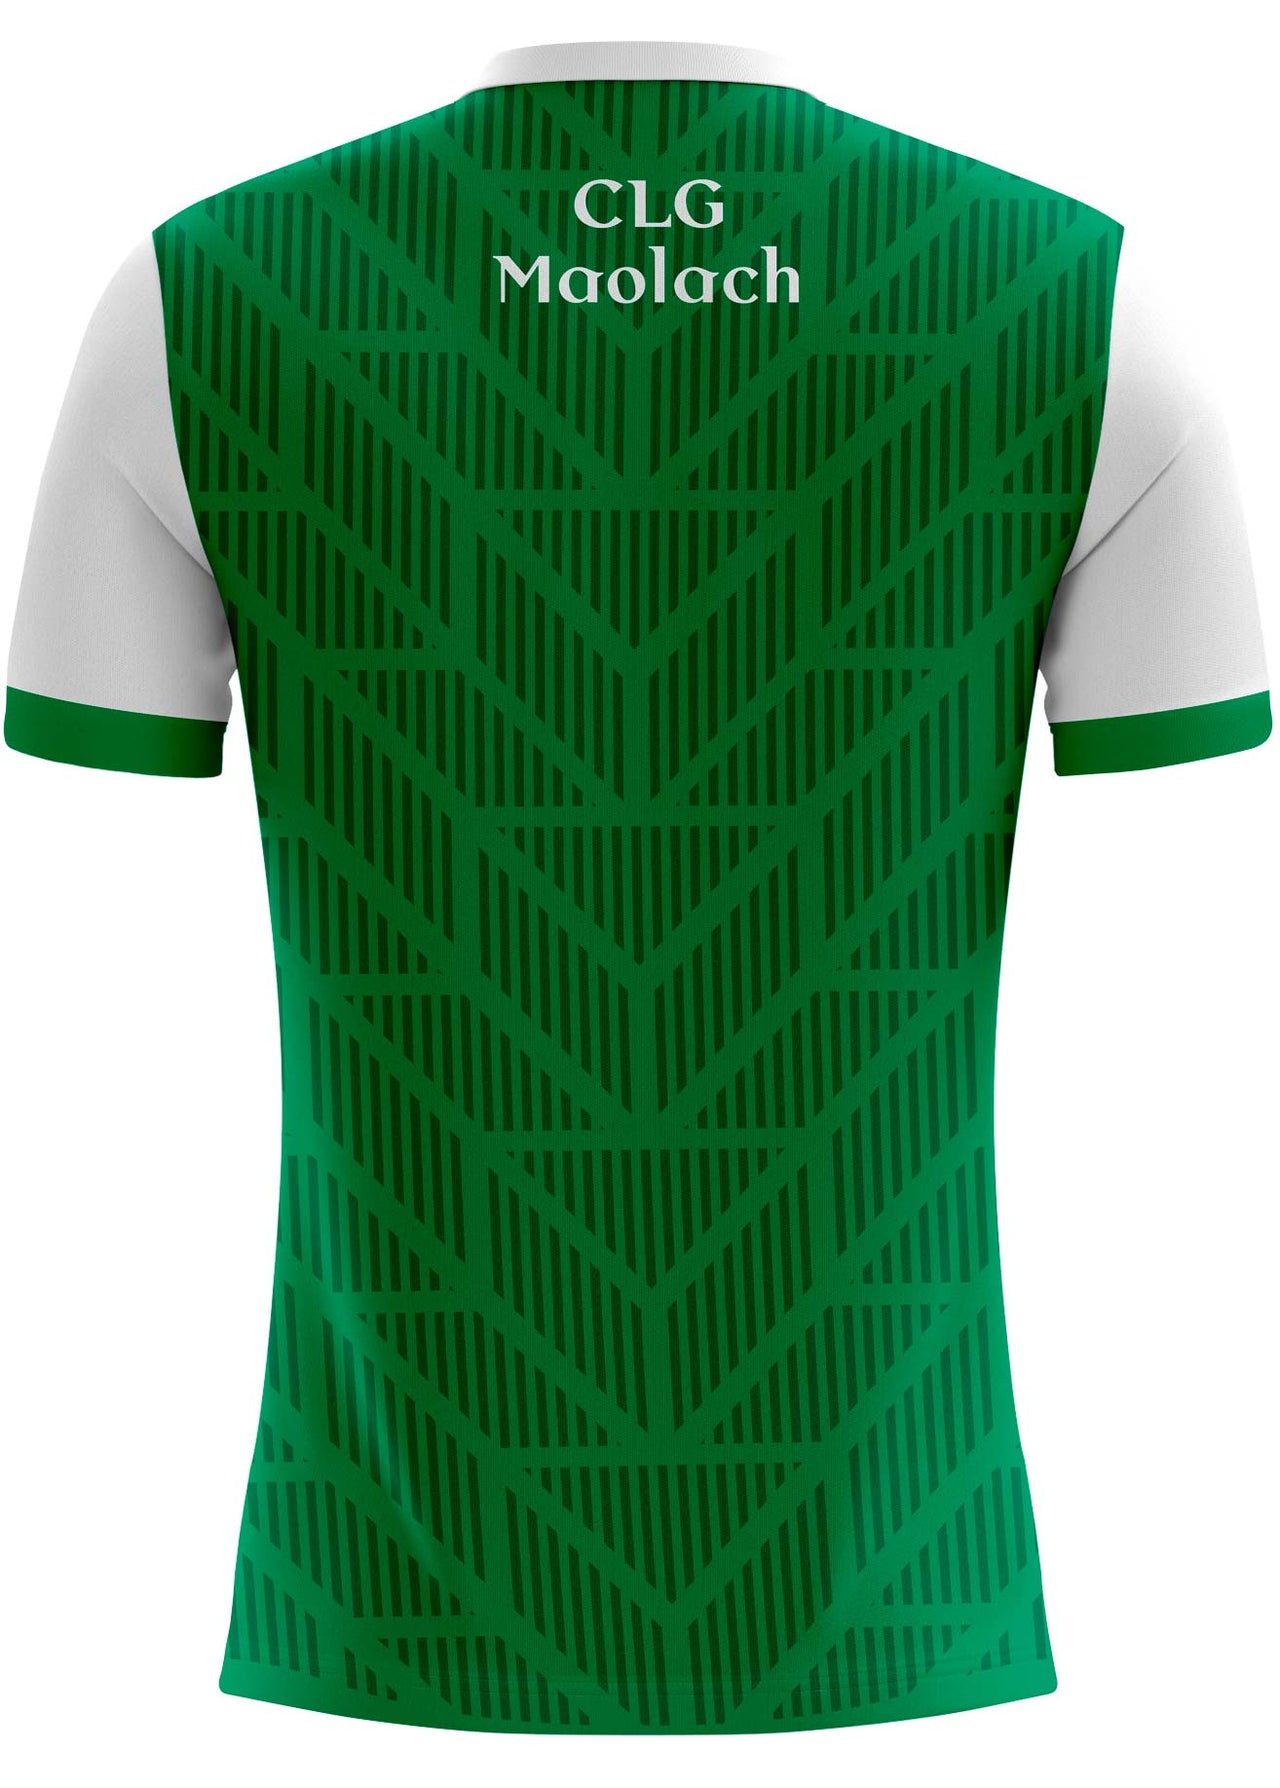 Moylagh CLG Home Jersey Player Fit Adult